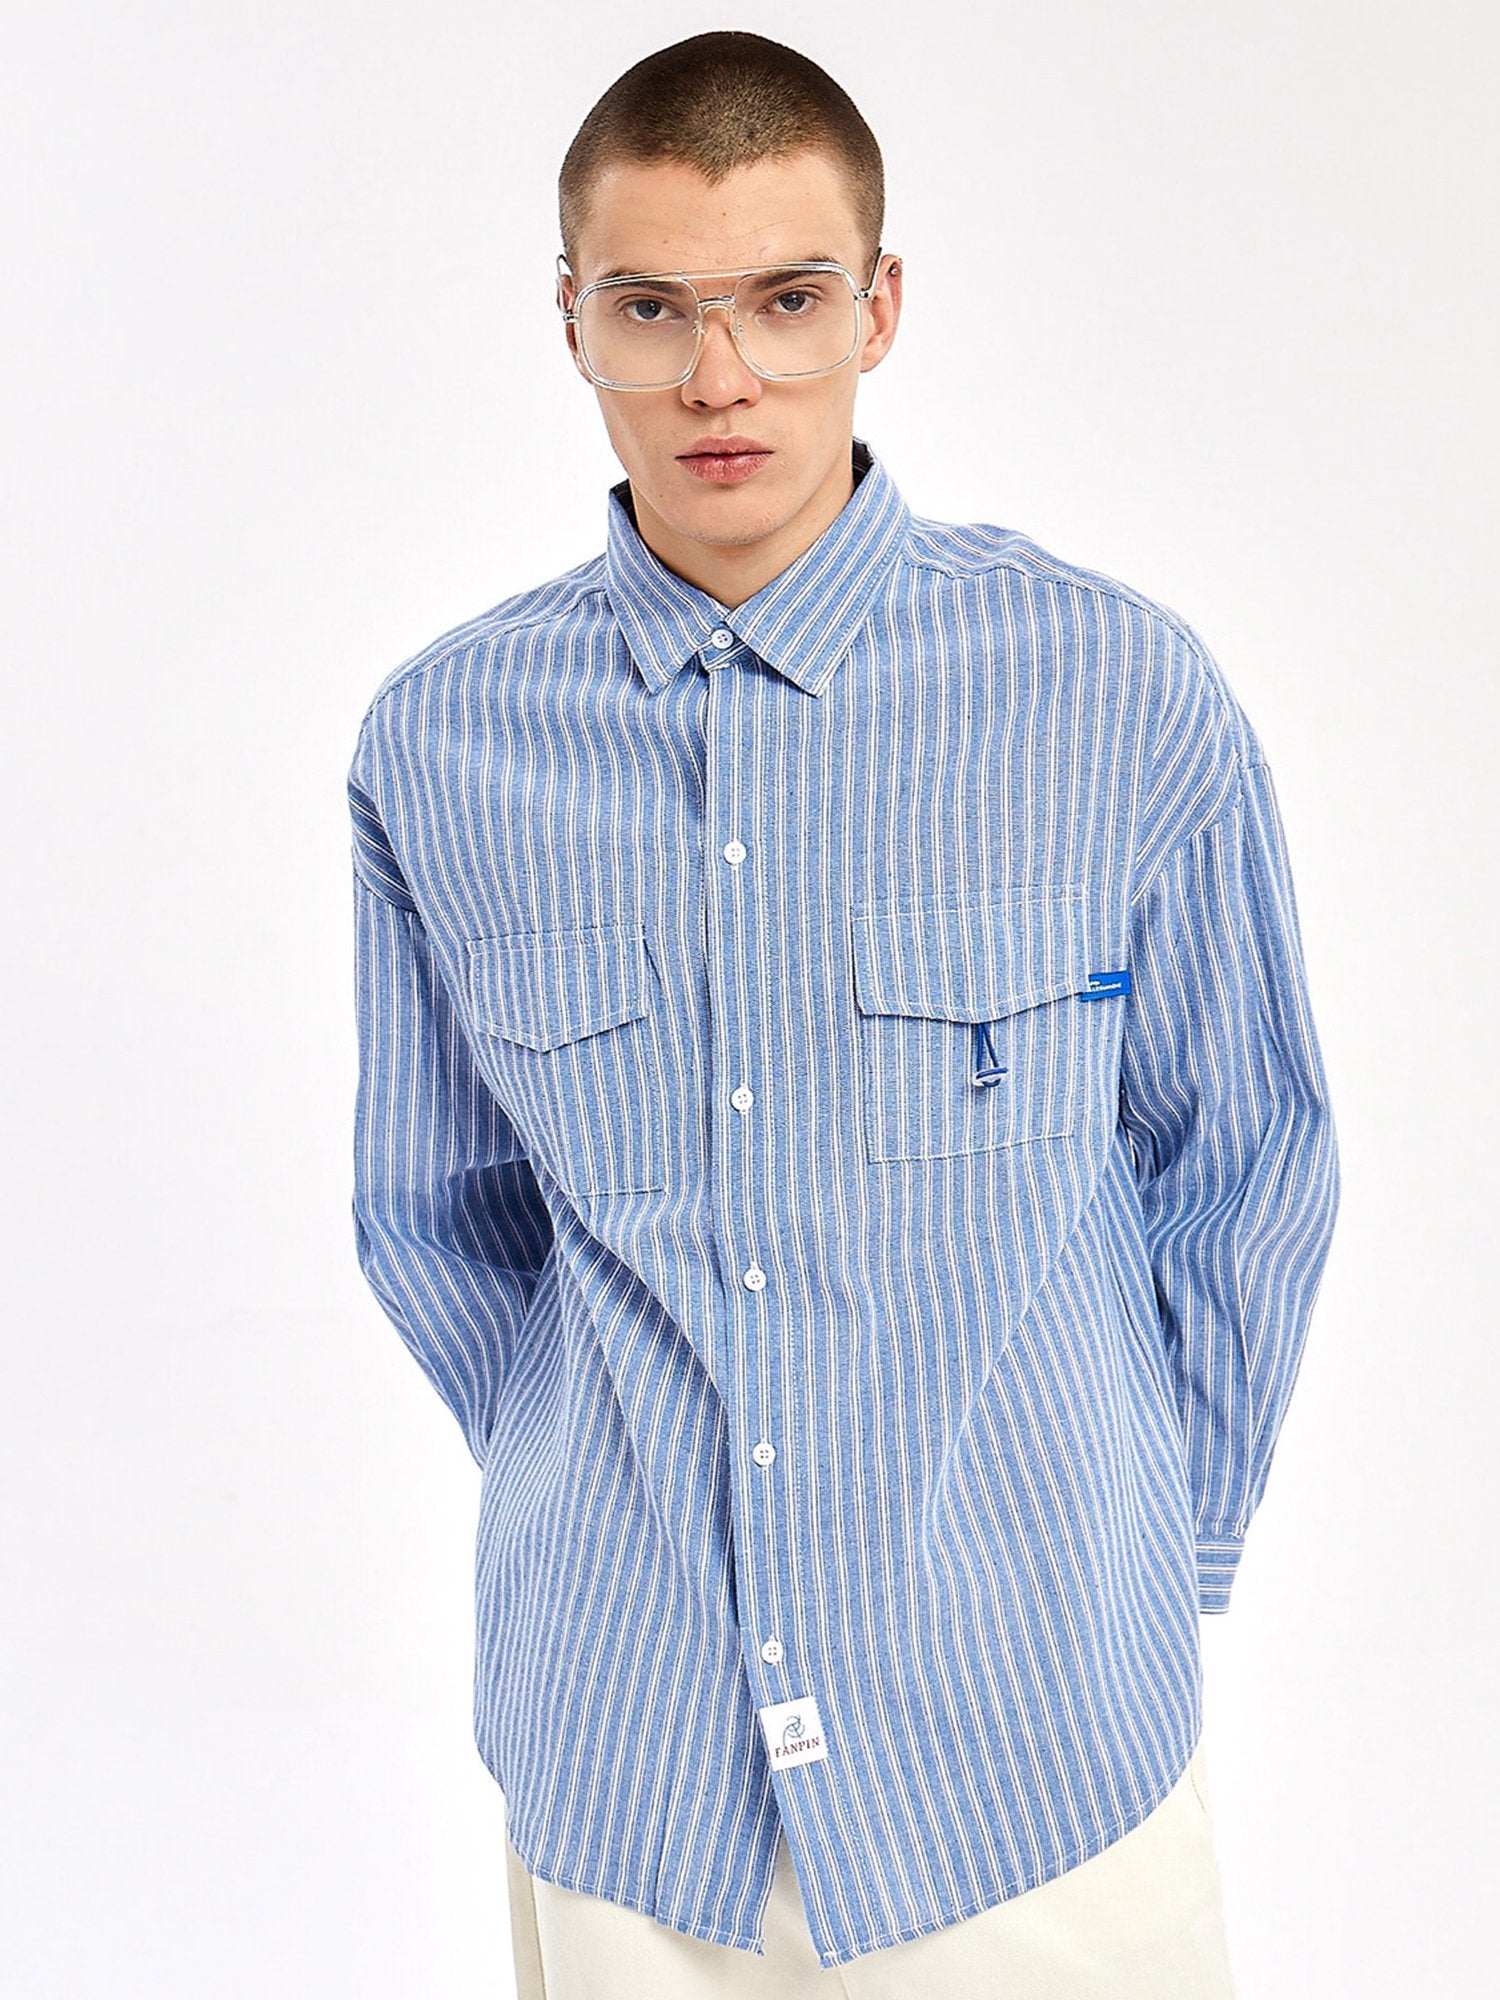 Full Sleeves Cotton Polyester Turn-down Collar Shirts